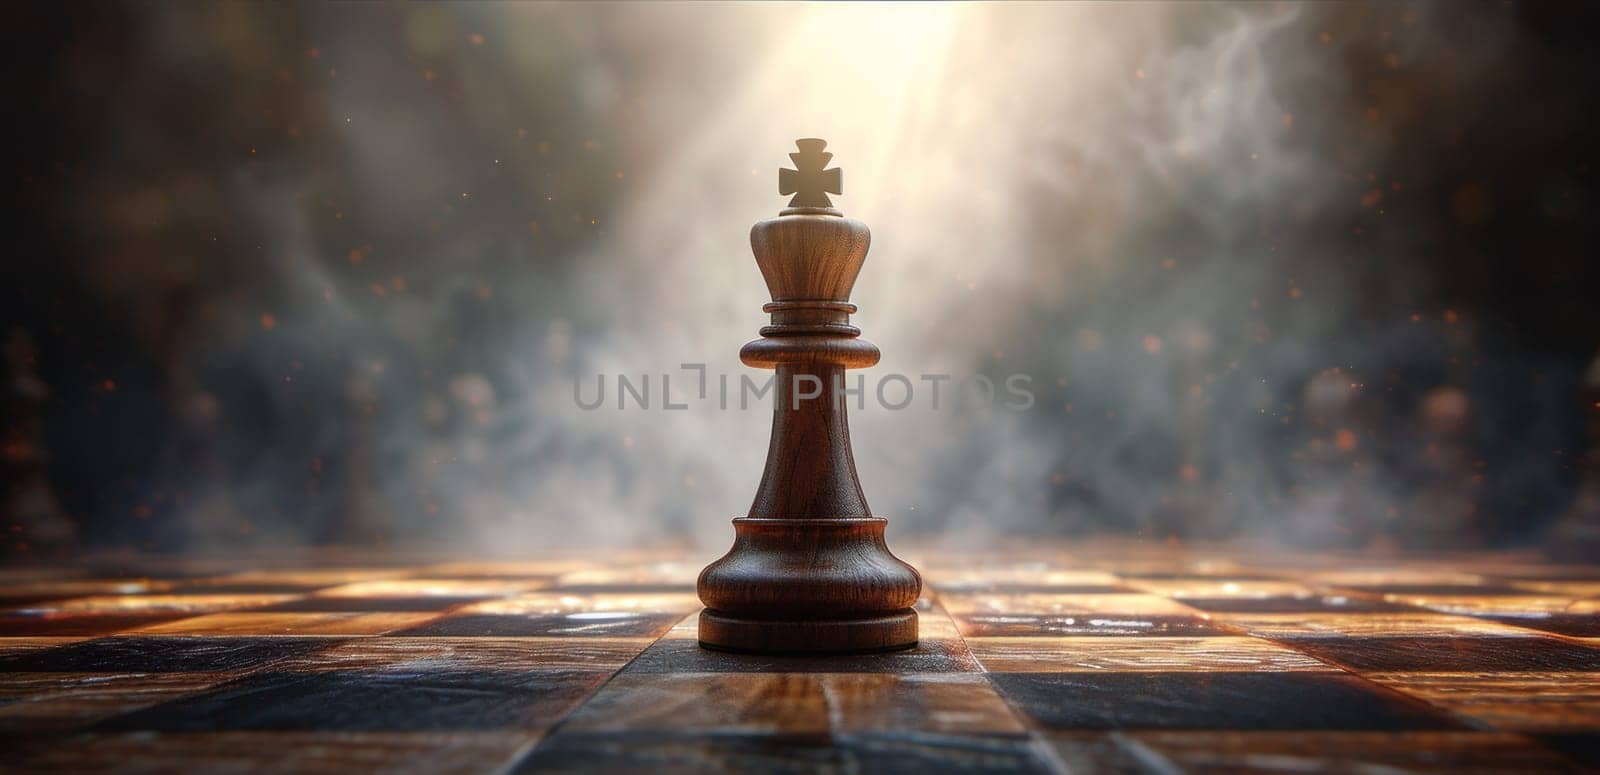 Chess Game with Dramatic Backlight and Smoke, Strategy and Tactics